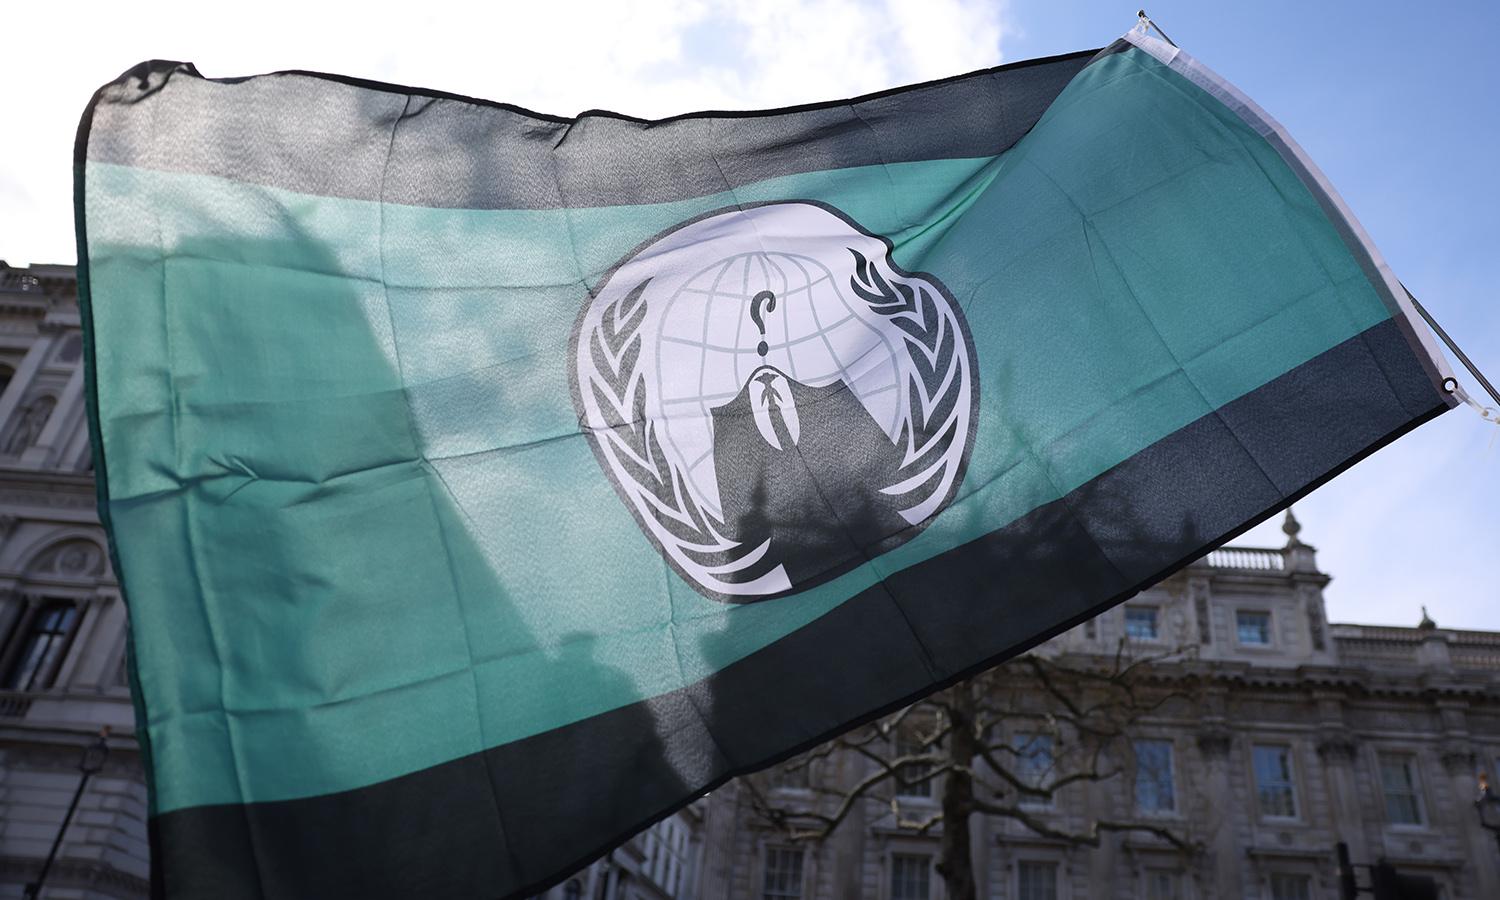 A demonstrator waves a flag of the hacking group known as &#8220;Anonymous&#8221; during The People&#8217;s Assembly Cost of Living Crisis protest on April 2, 2022. in London. (Photo by Hollie Adams/Getty Images)